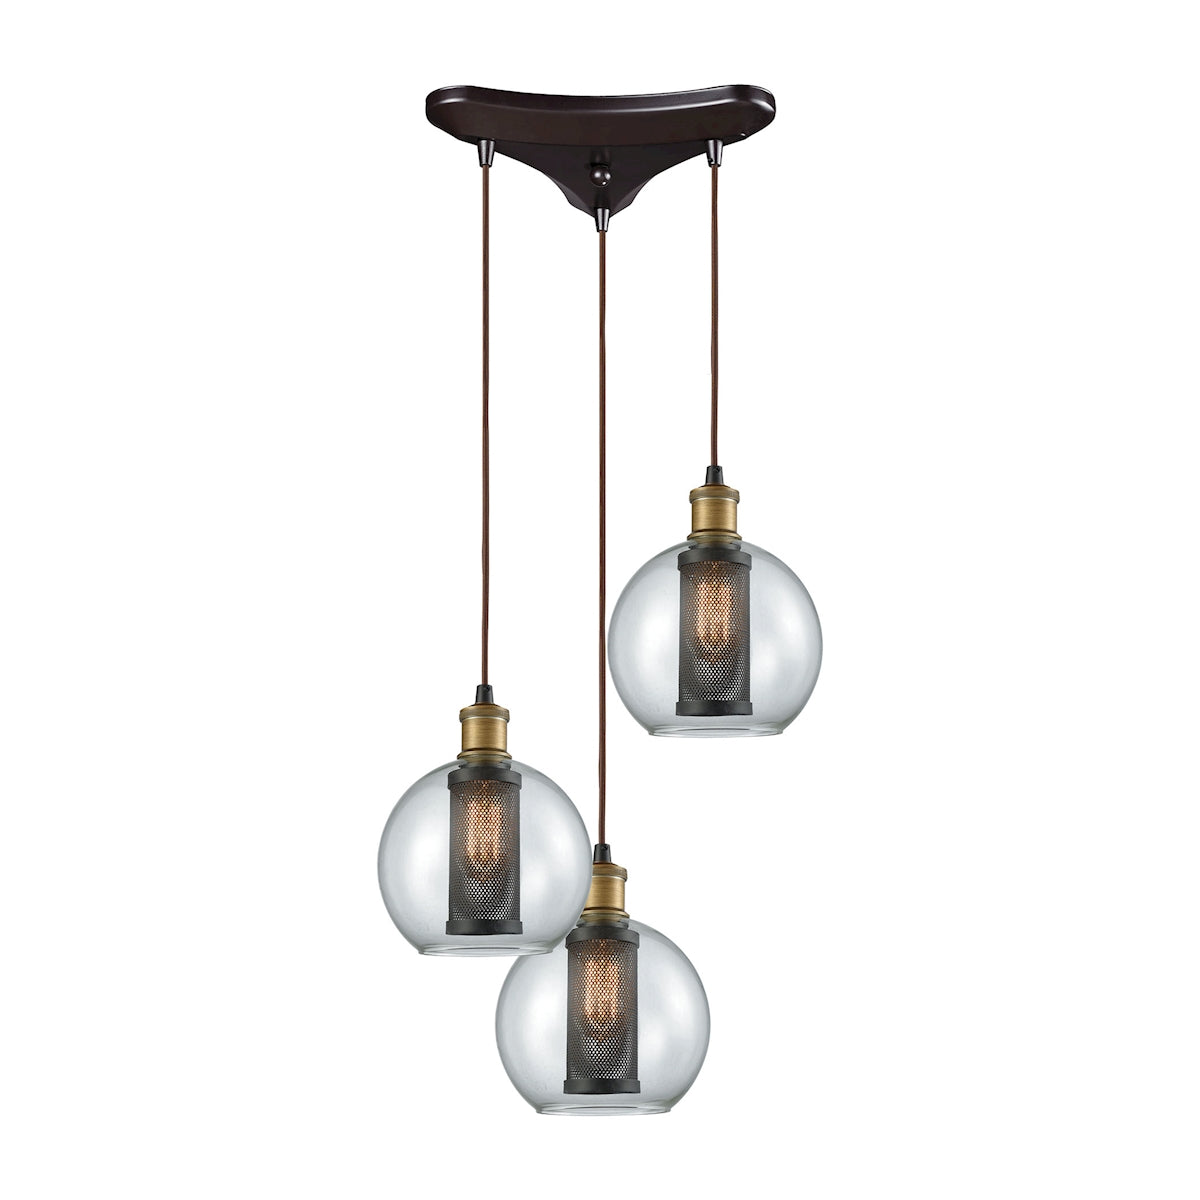 ELK Lighting 14530/3 Bremington 3-Light Triangular Pendant Fixture in Oiled Bronze with Clear Glass and Cage